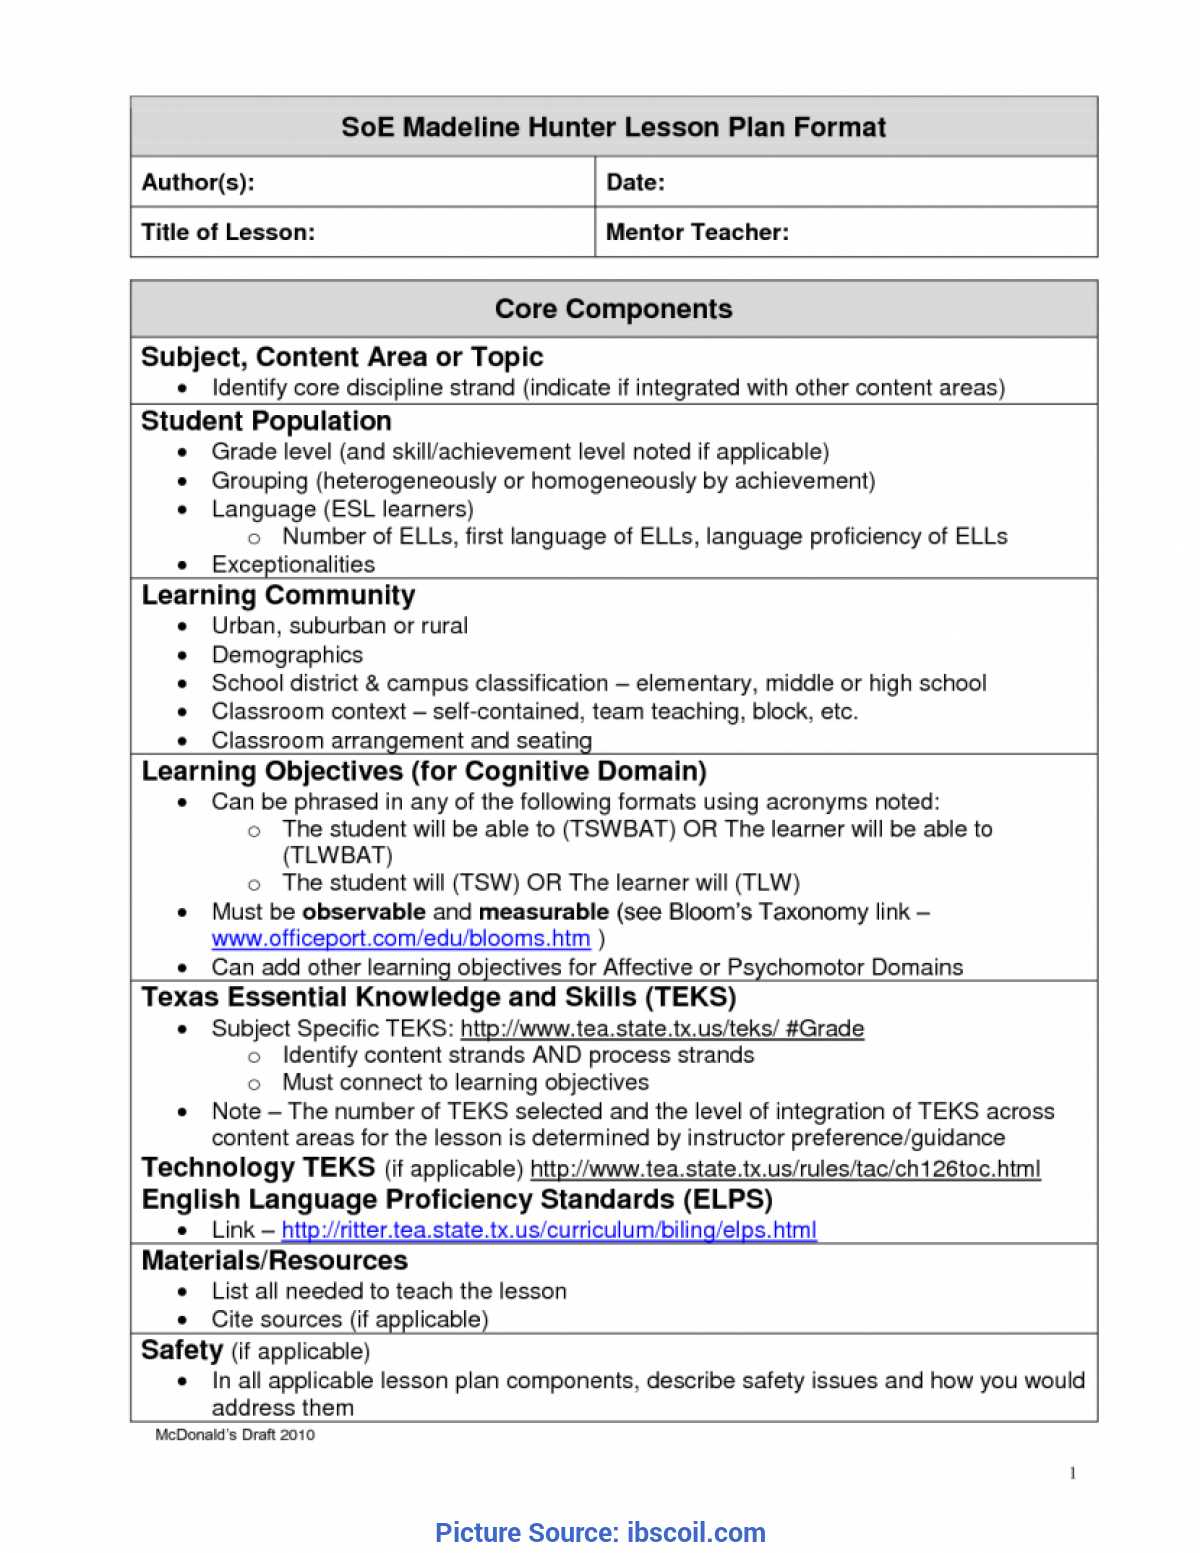 Madeline Hunter Lesson Plan Template Twiroo Com | Lesso Intended For Madeline Hunter Lesson Plan Template Word